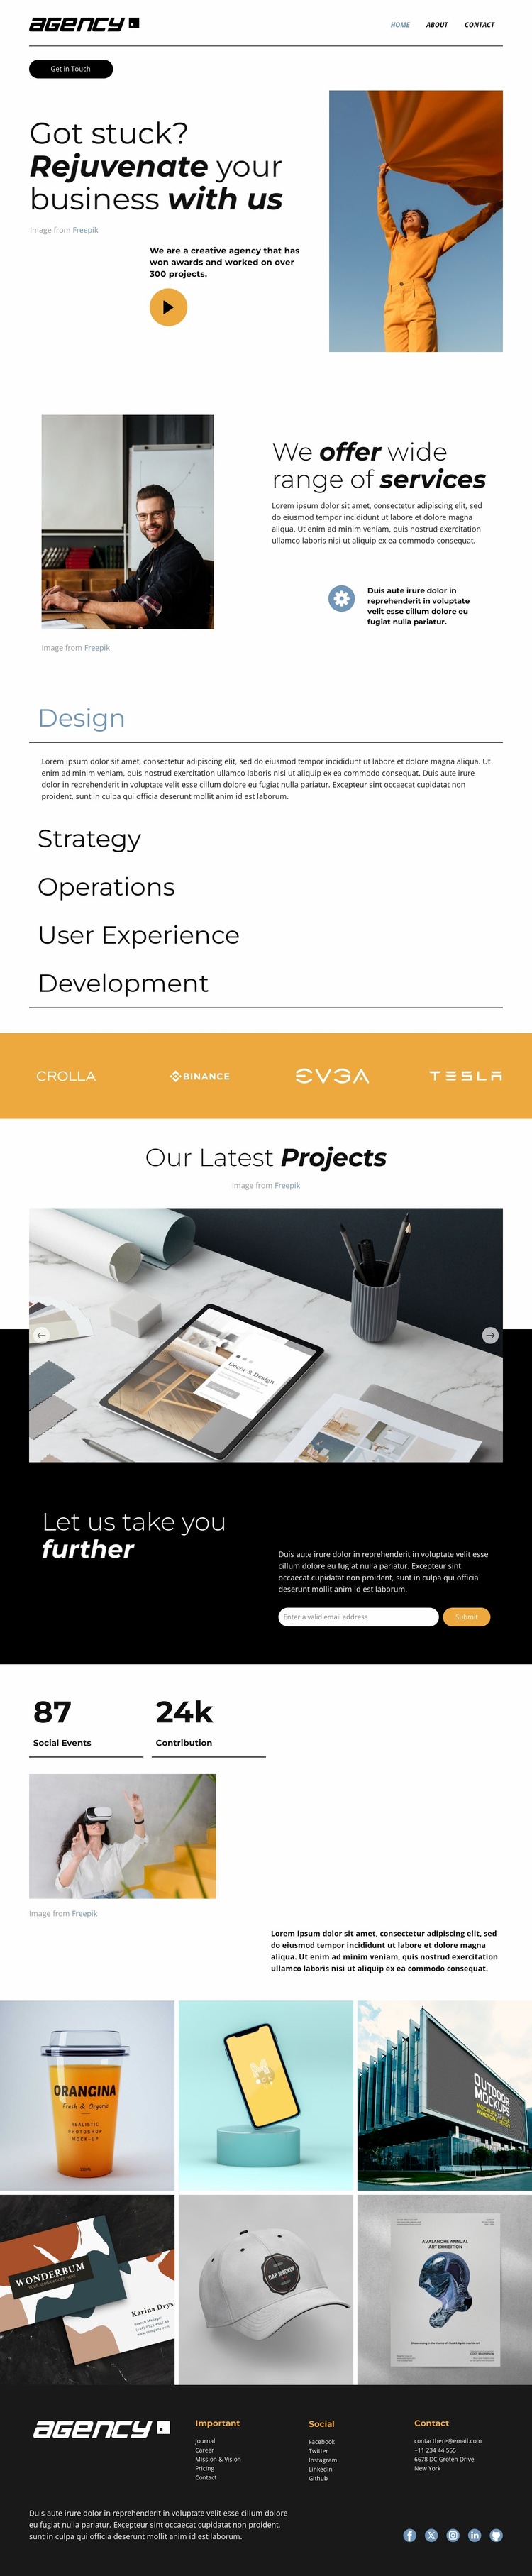 Scale to greater success Website Builder Templates